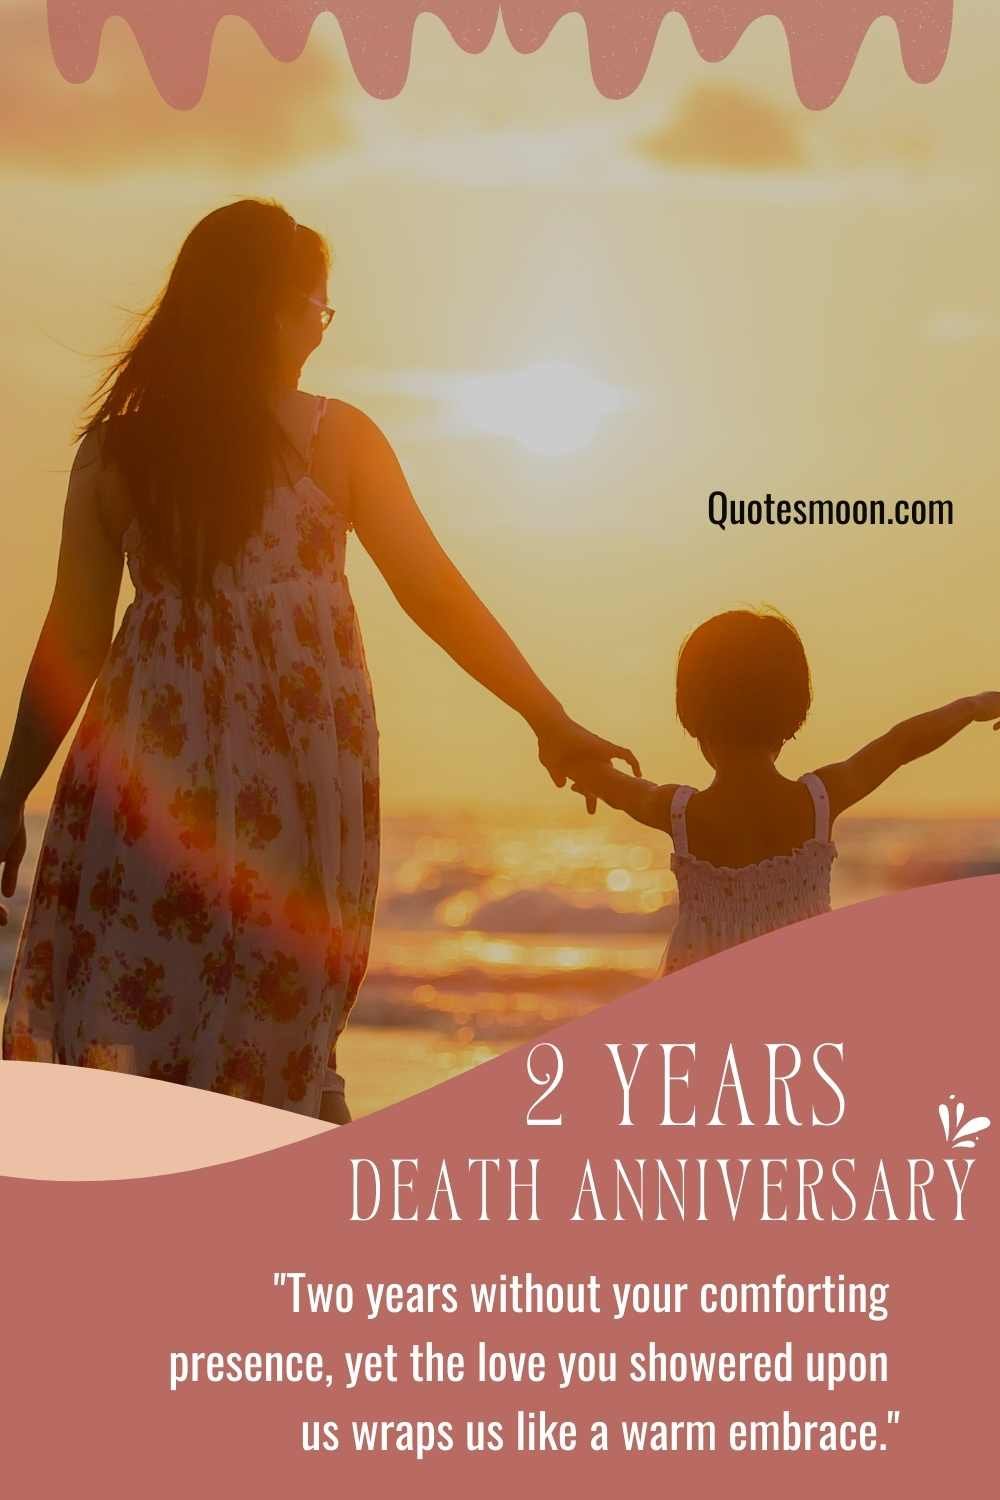 Quotes For two Year Anniversary Of The Death Of a mother with images